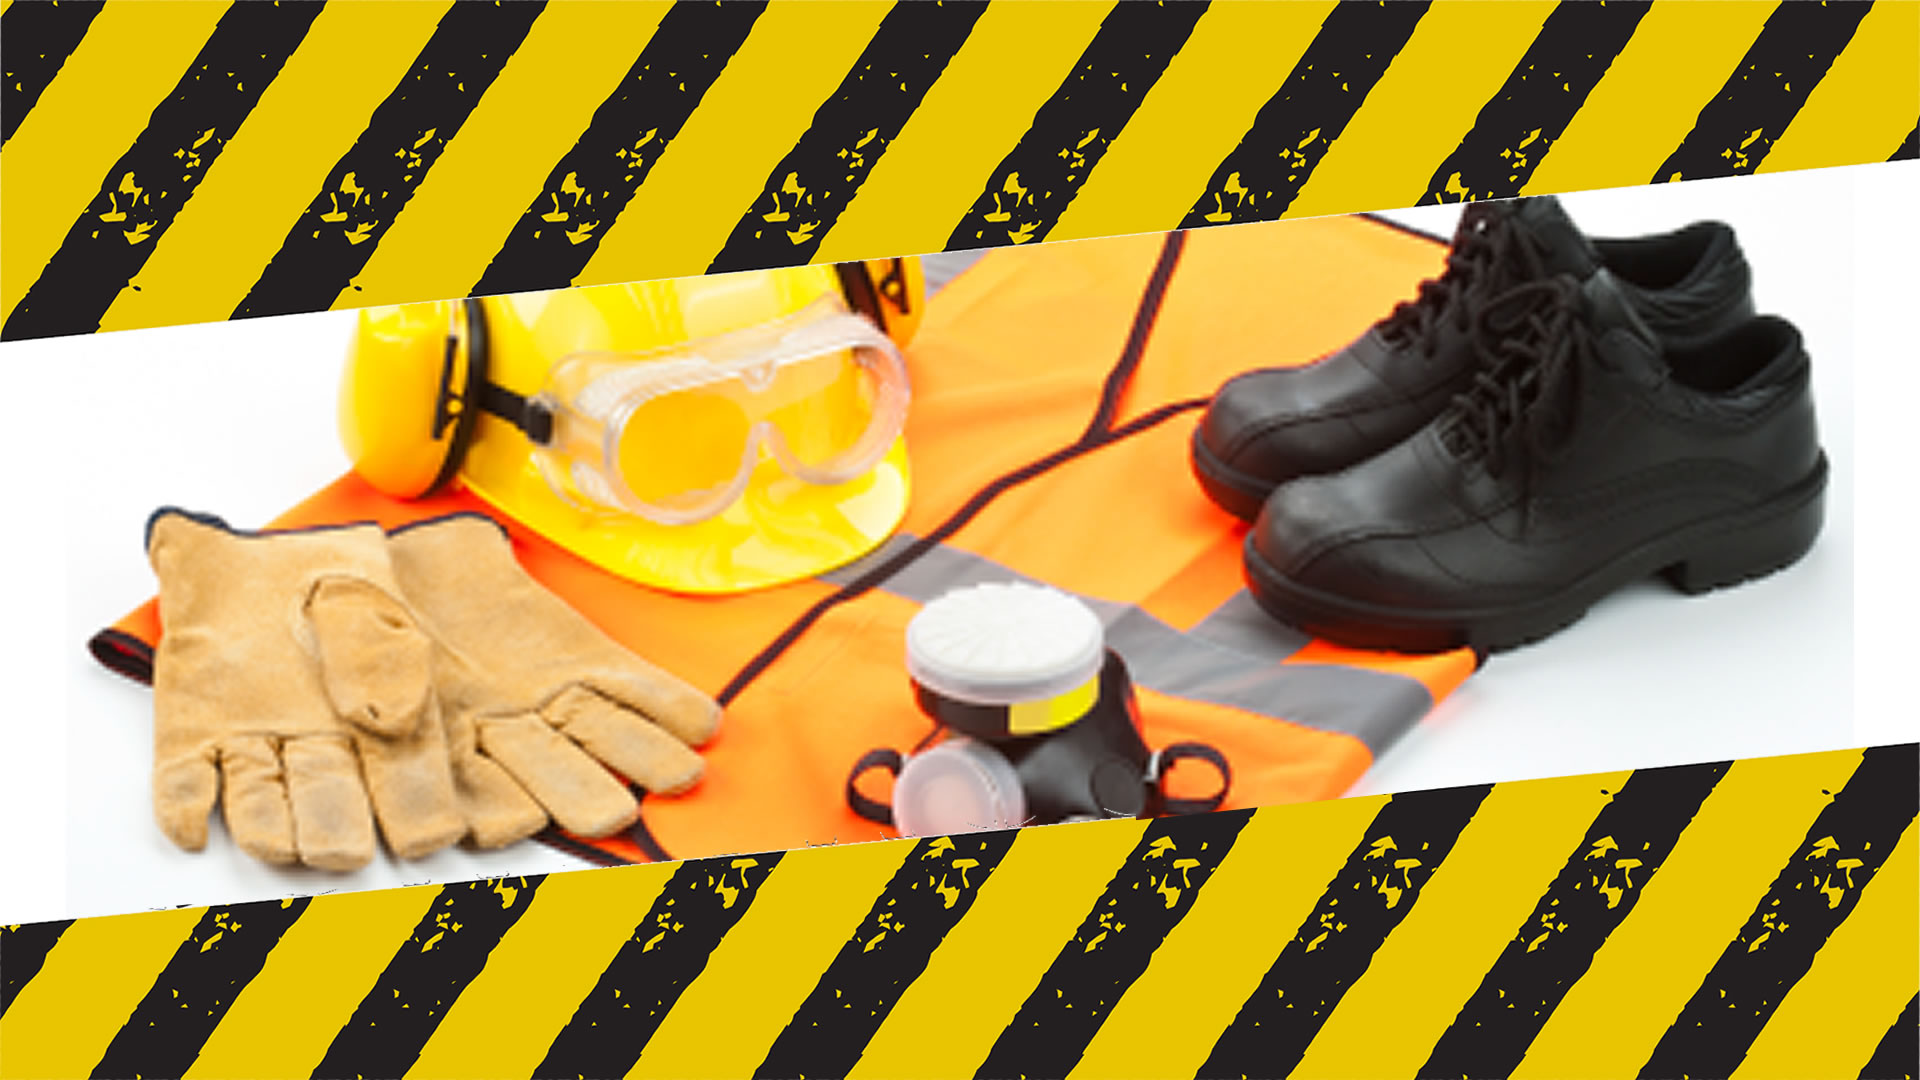 How Is Safety Clothing Useful For Human Beings?